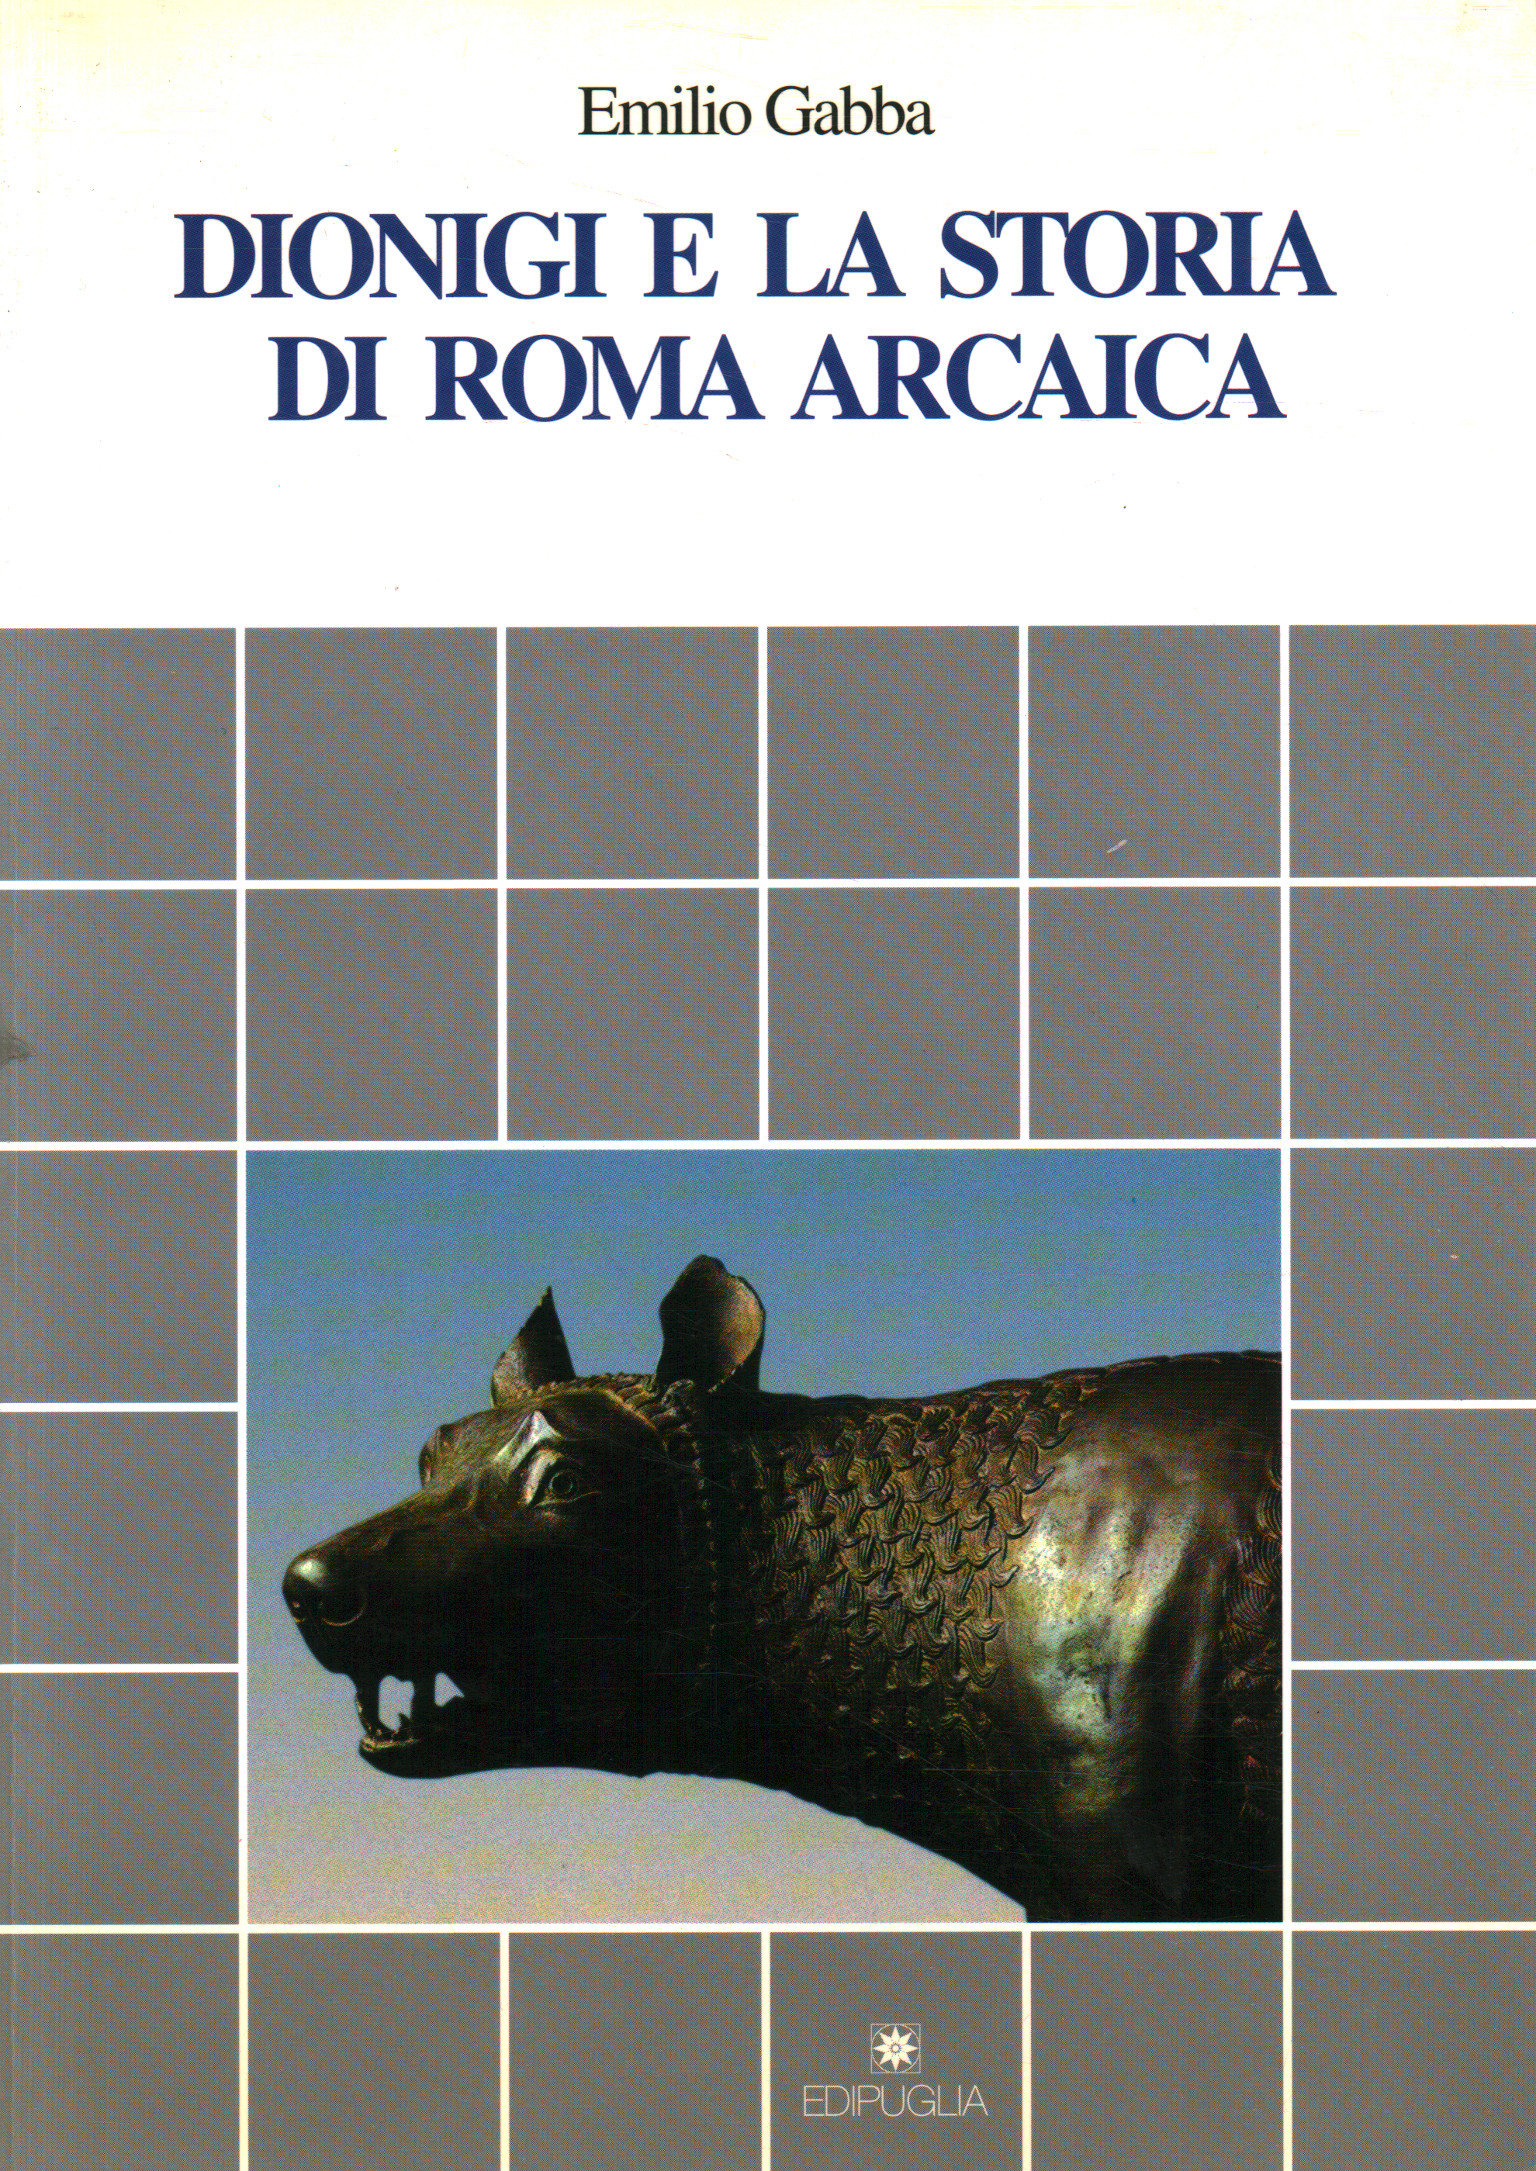 Dionysius and the history of archaic Rome